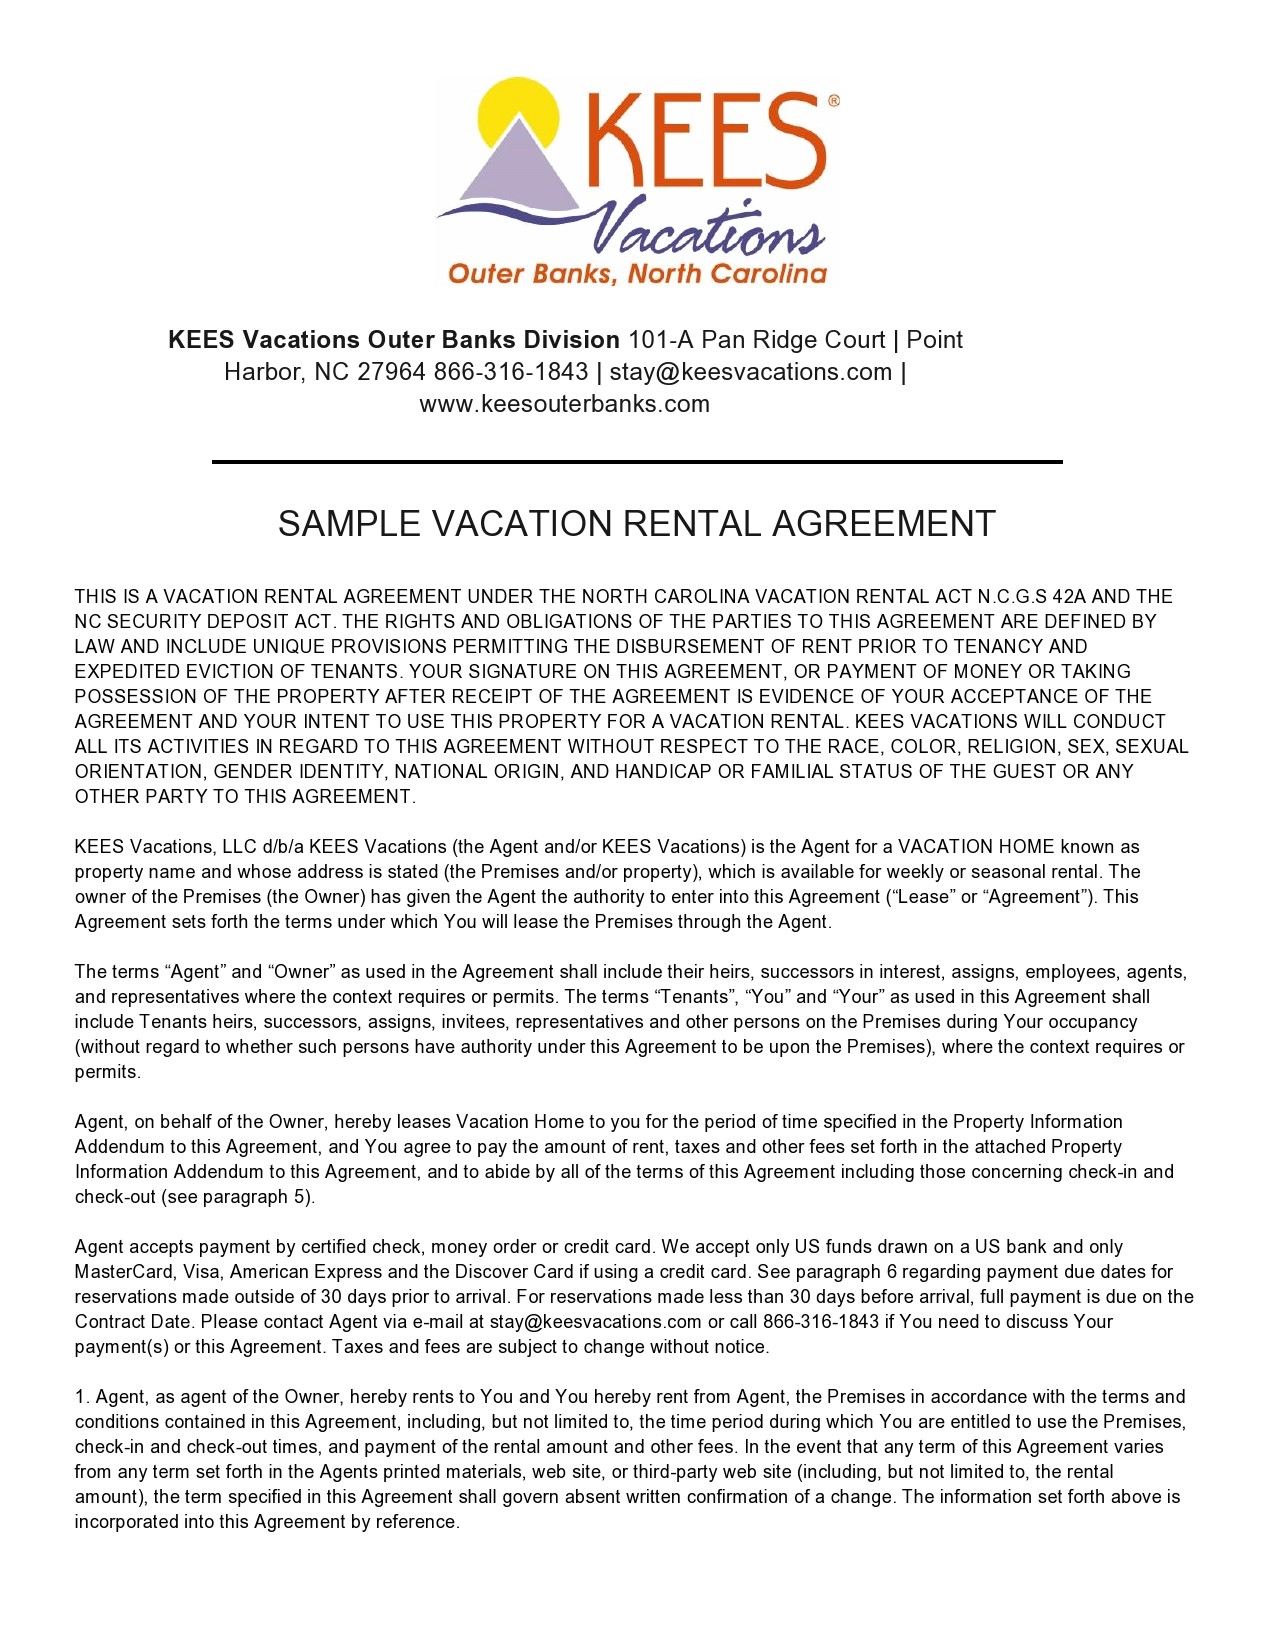 Free vacation rental agreement 05